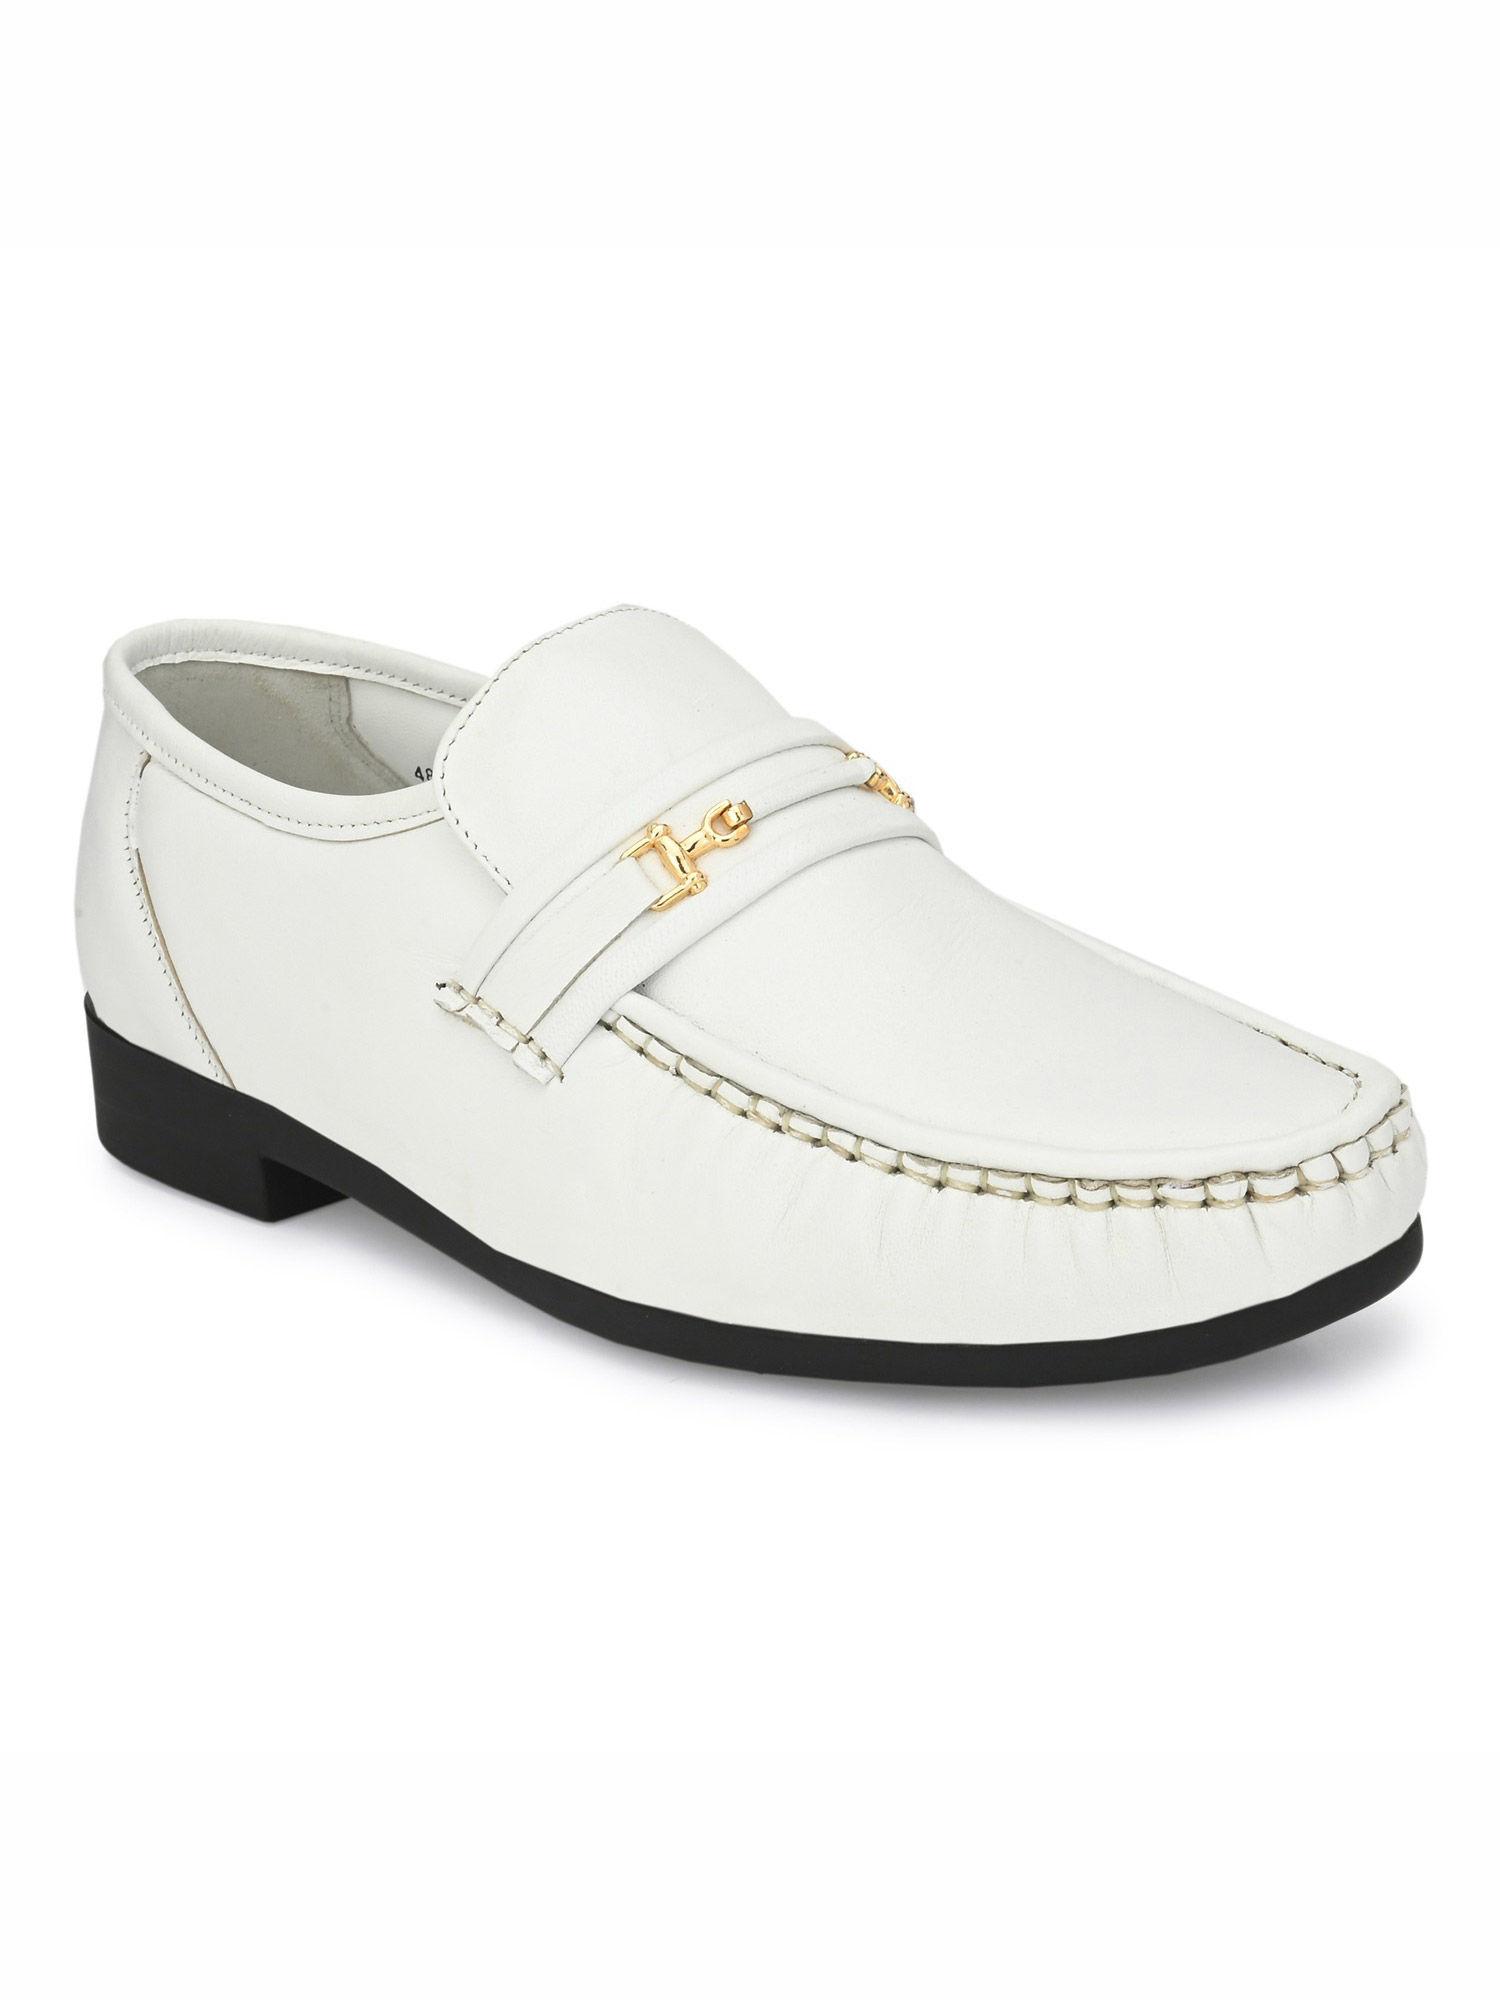 solid white leather comfort shoes